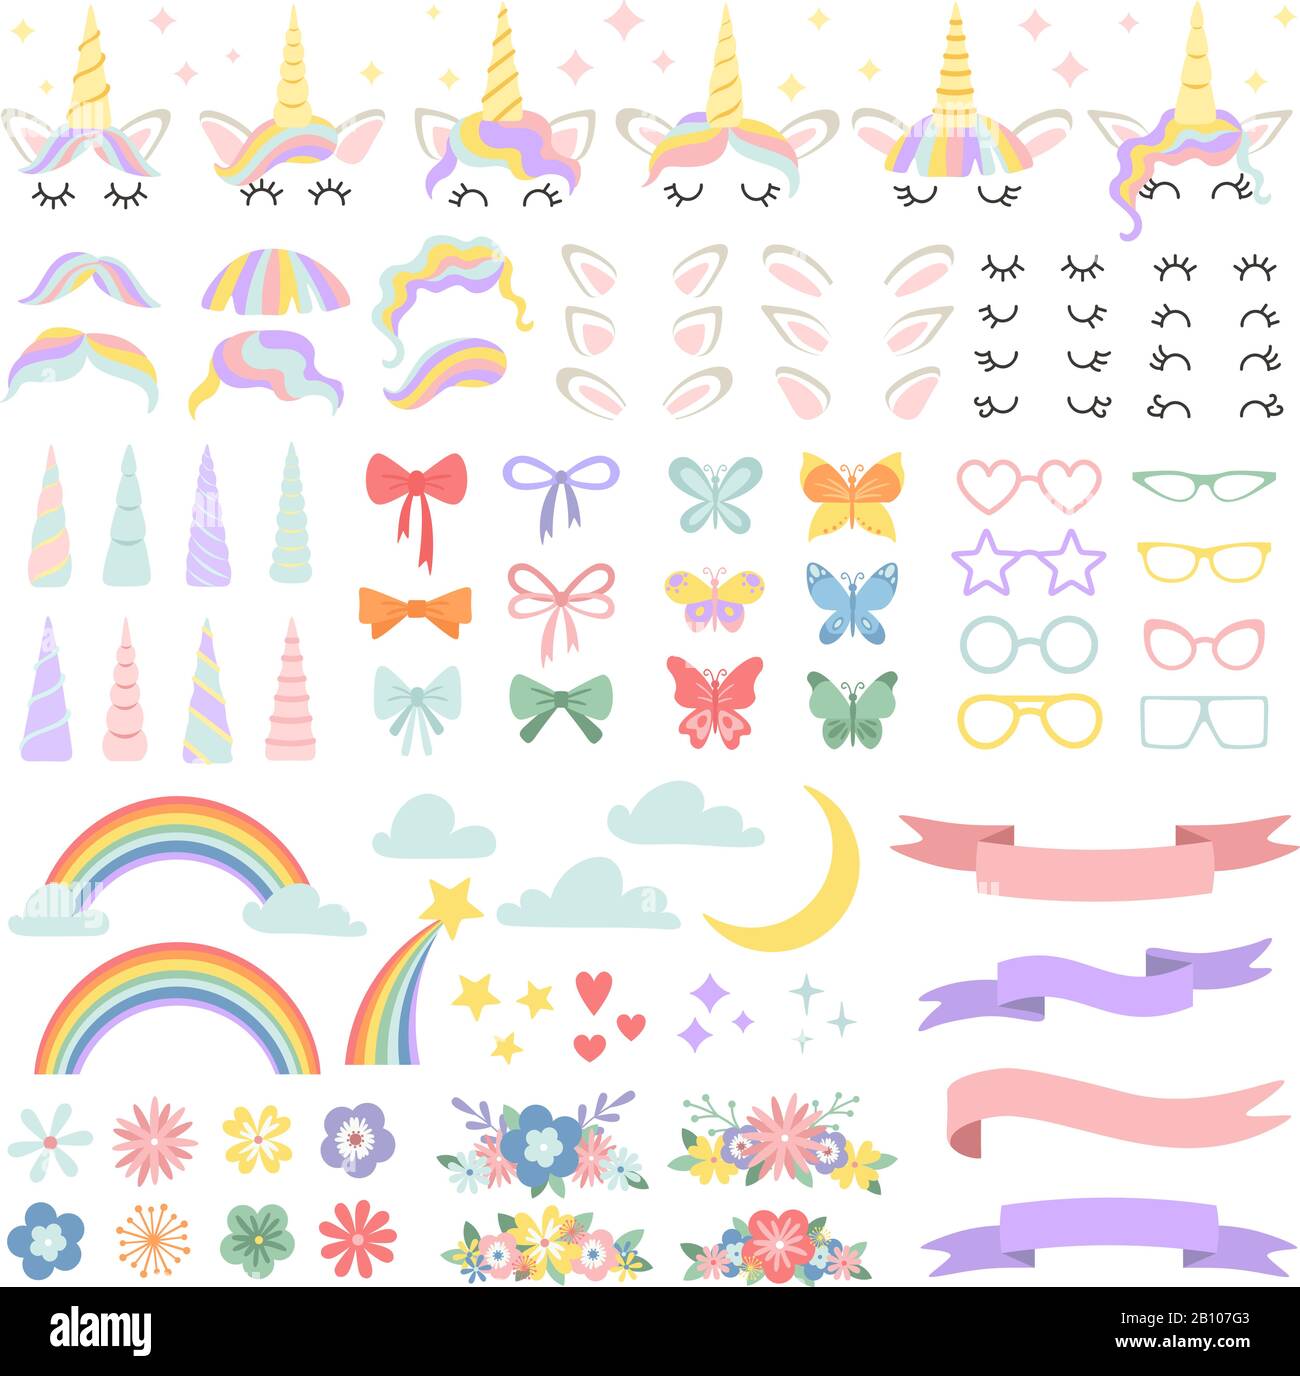 Unicorn constructor. Pony mane styling bundle, unicorns horn and party star glasses. Flowers, magic rainbow and head bows vector set Stock Vector